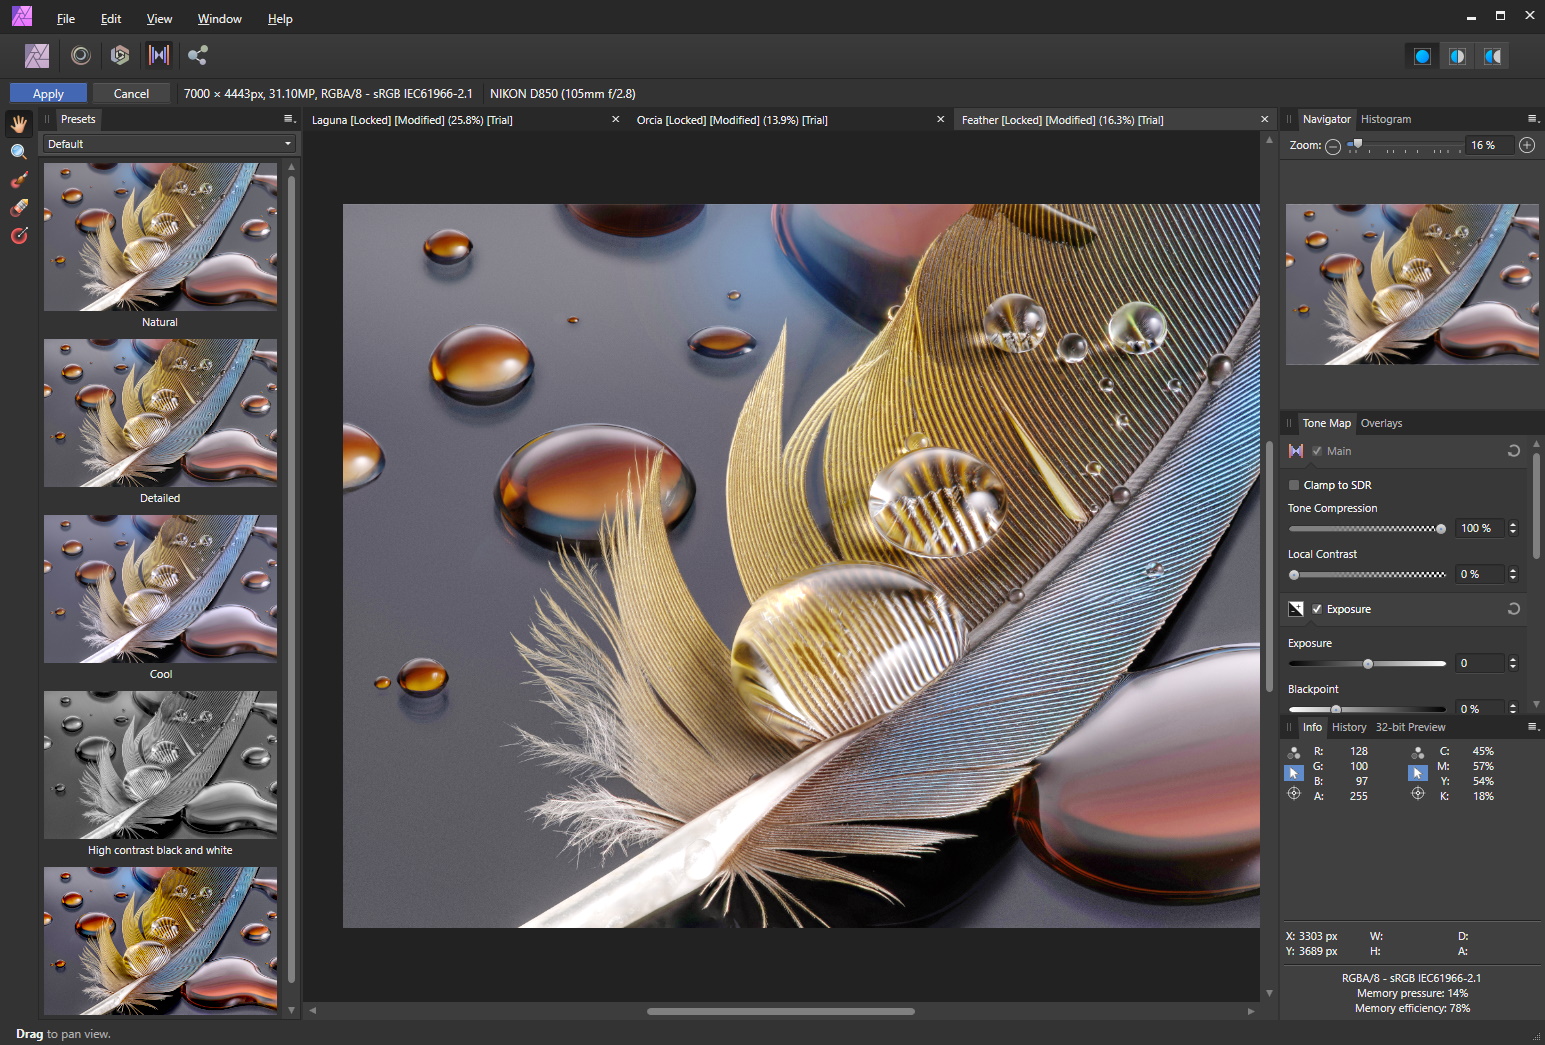 affinity photo download free